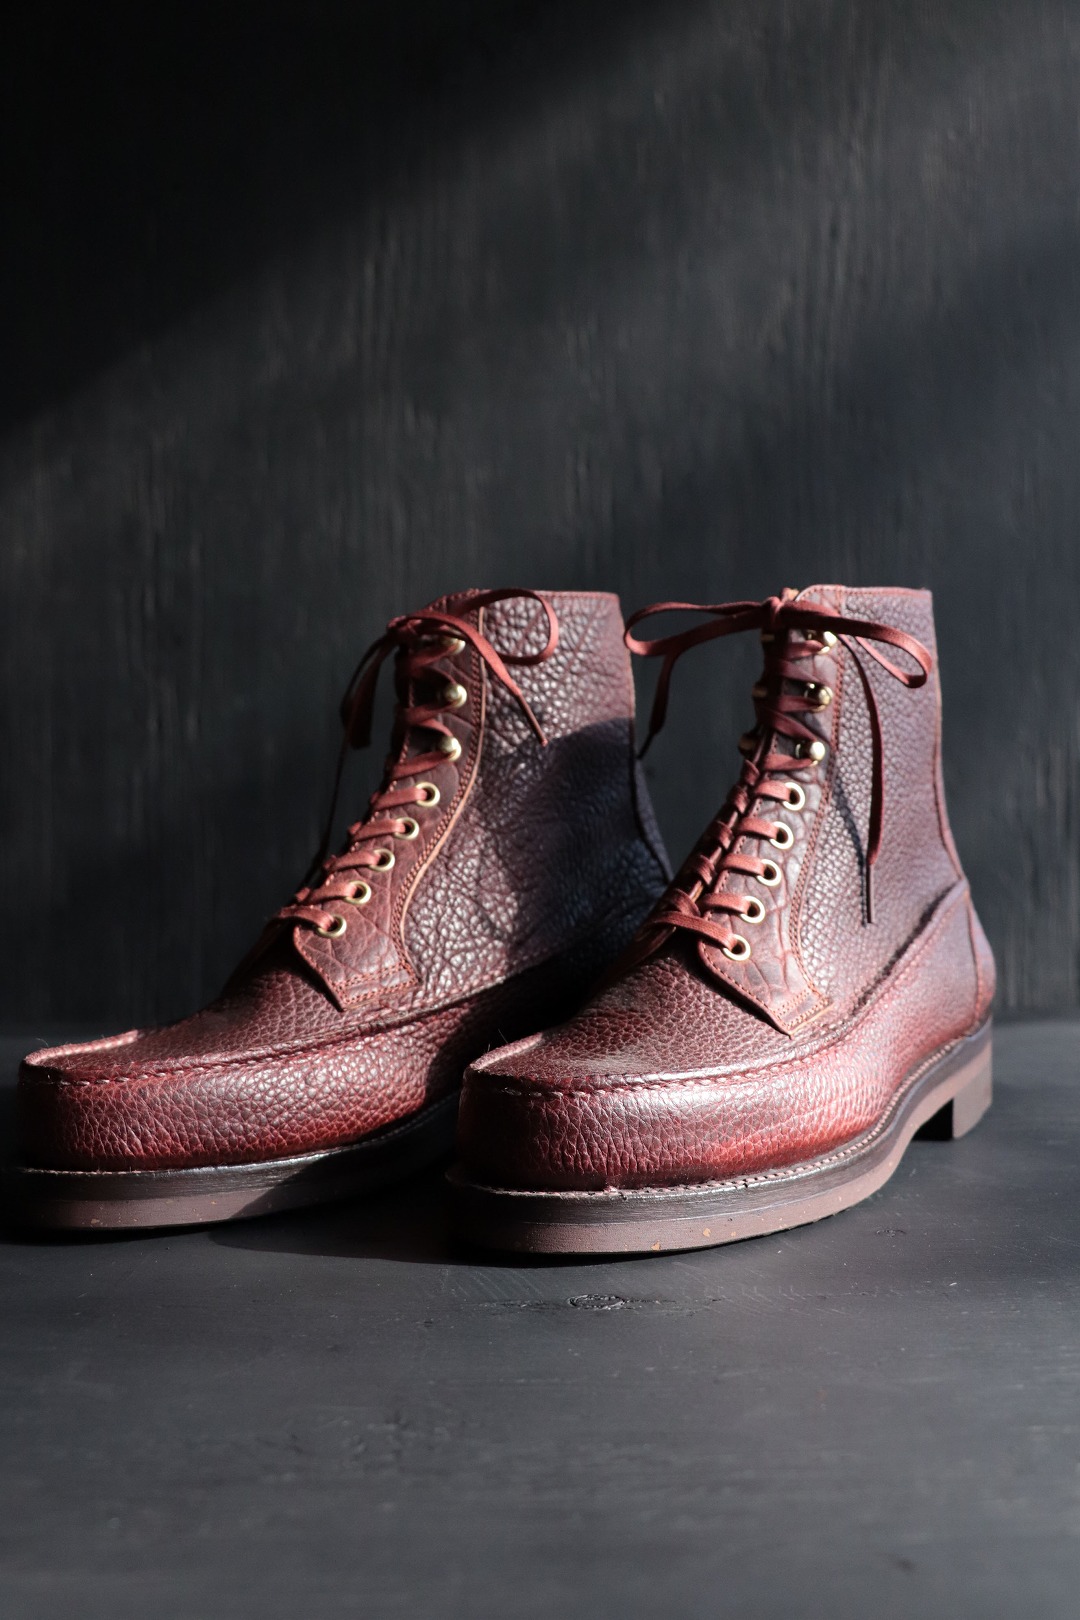 BLACK SIGN Main Lodge / 【SKOOB】 WHOLE MOCCASIN LACE-UP / Red Brown